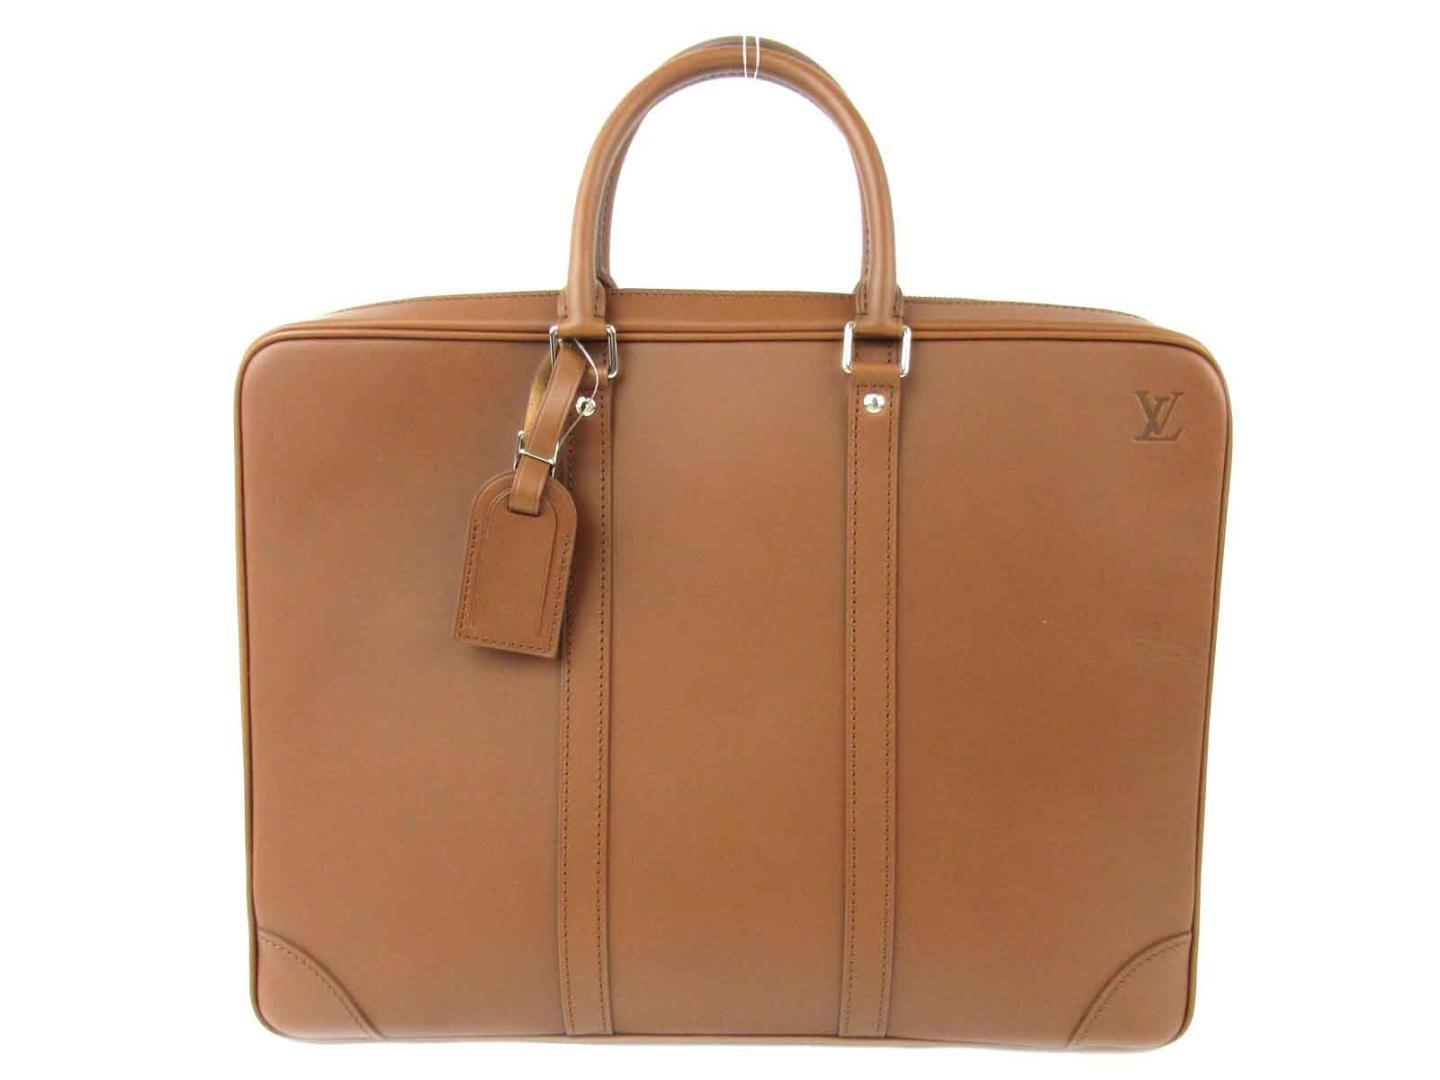 Louis Vuitton Leather Porte Documents Voyage Business Bag Briefcase M56274 Nomad Tabac in Brown ...